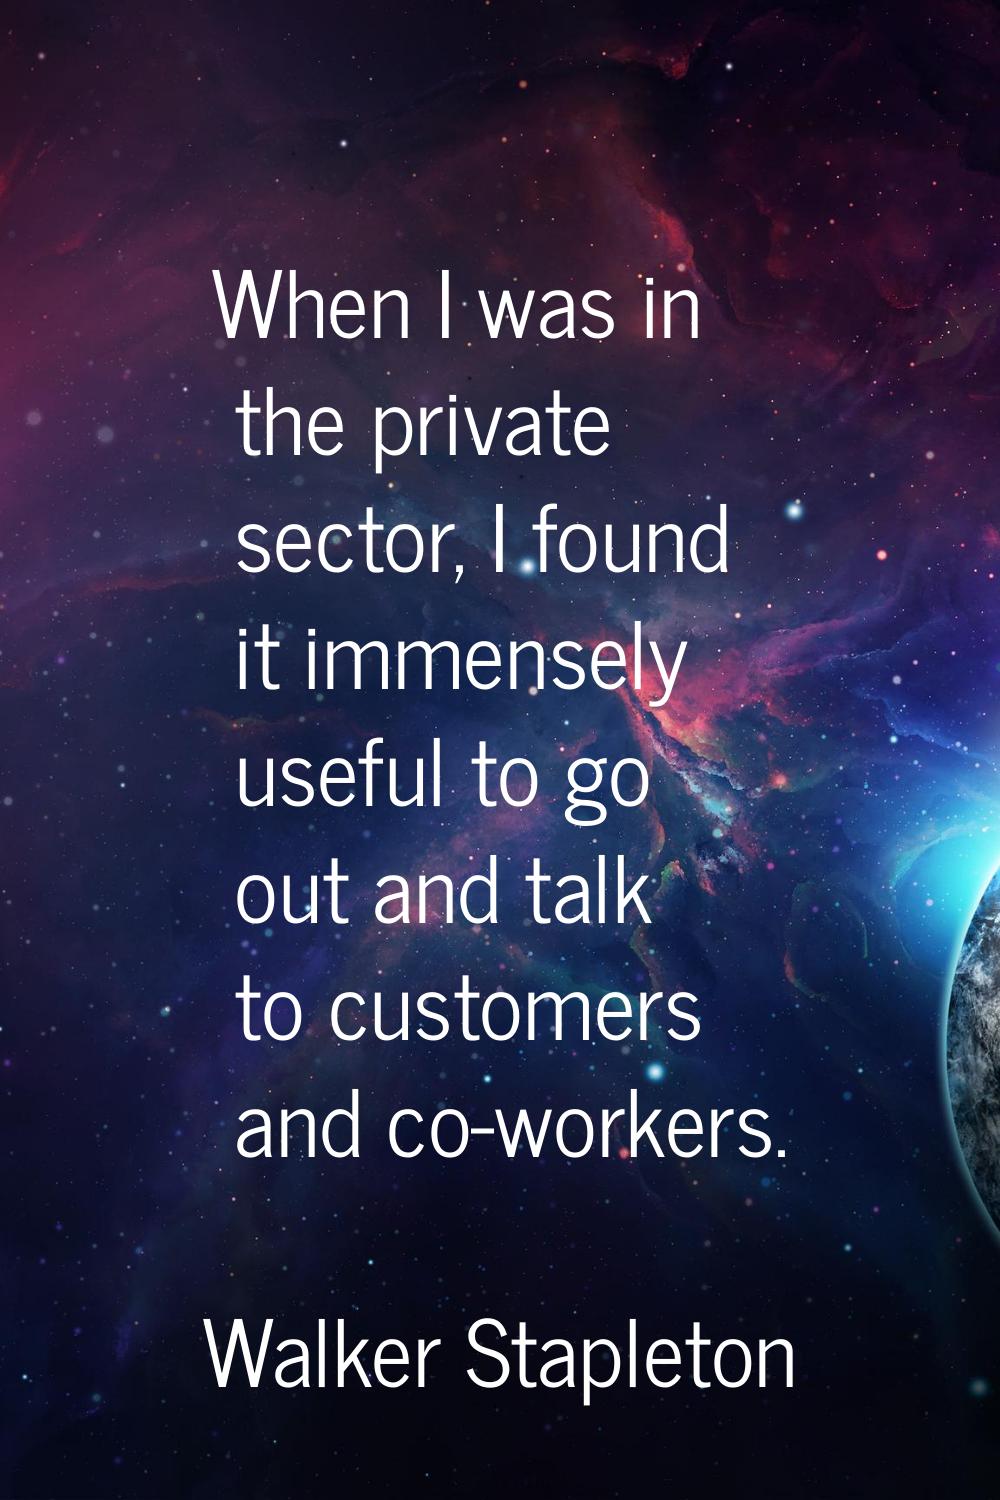 When I was in the private sector, I found it immensely useful to go out and talk to customers and c